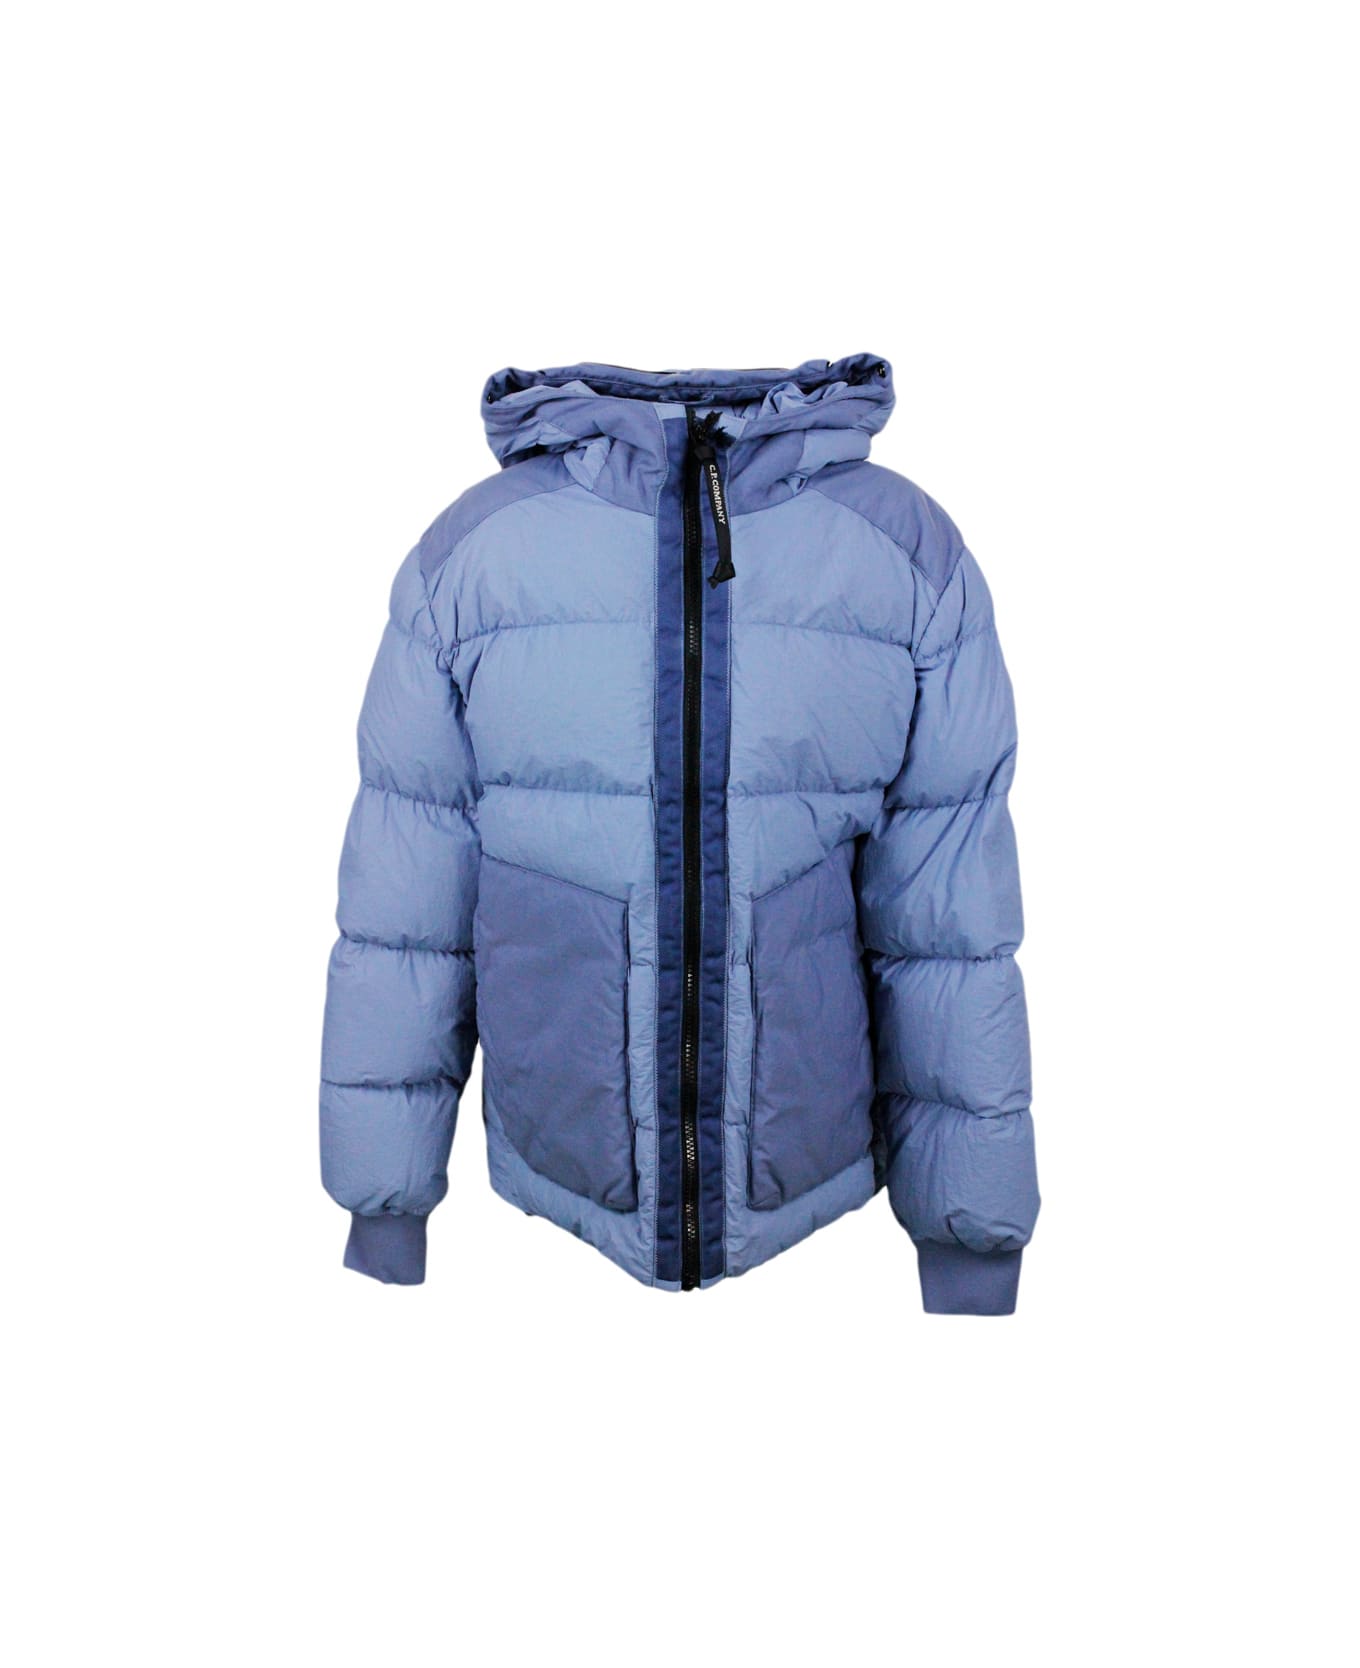 C.P. Company Down Jacket In Real Goose Down In Taylon L Fabric In Garment Dyed. Full Zip Closure, Integrated Hood, Google Hood - Blu